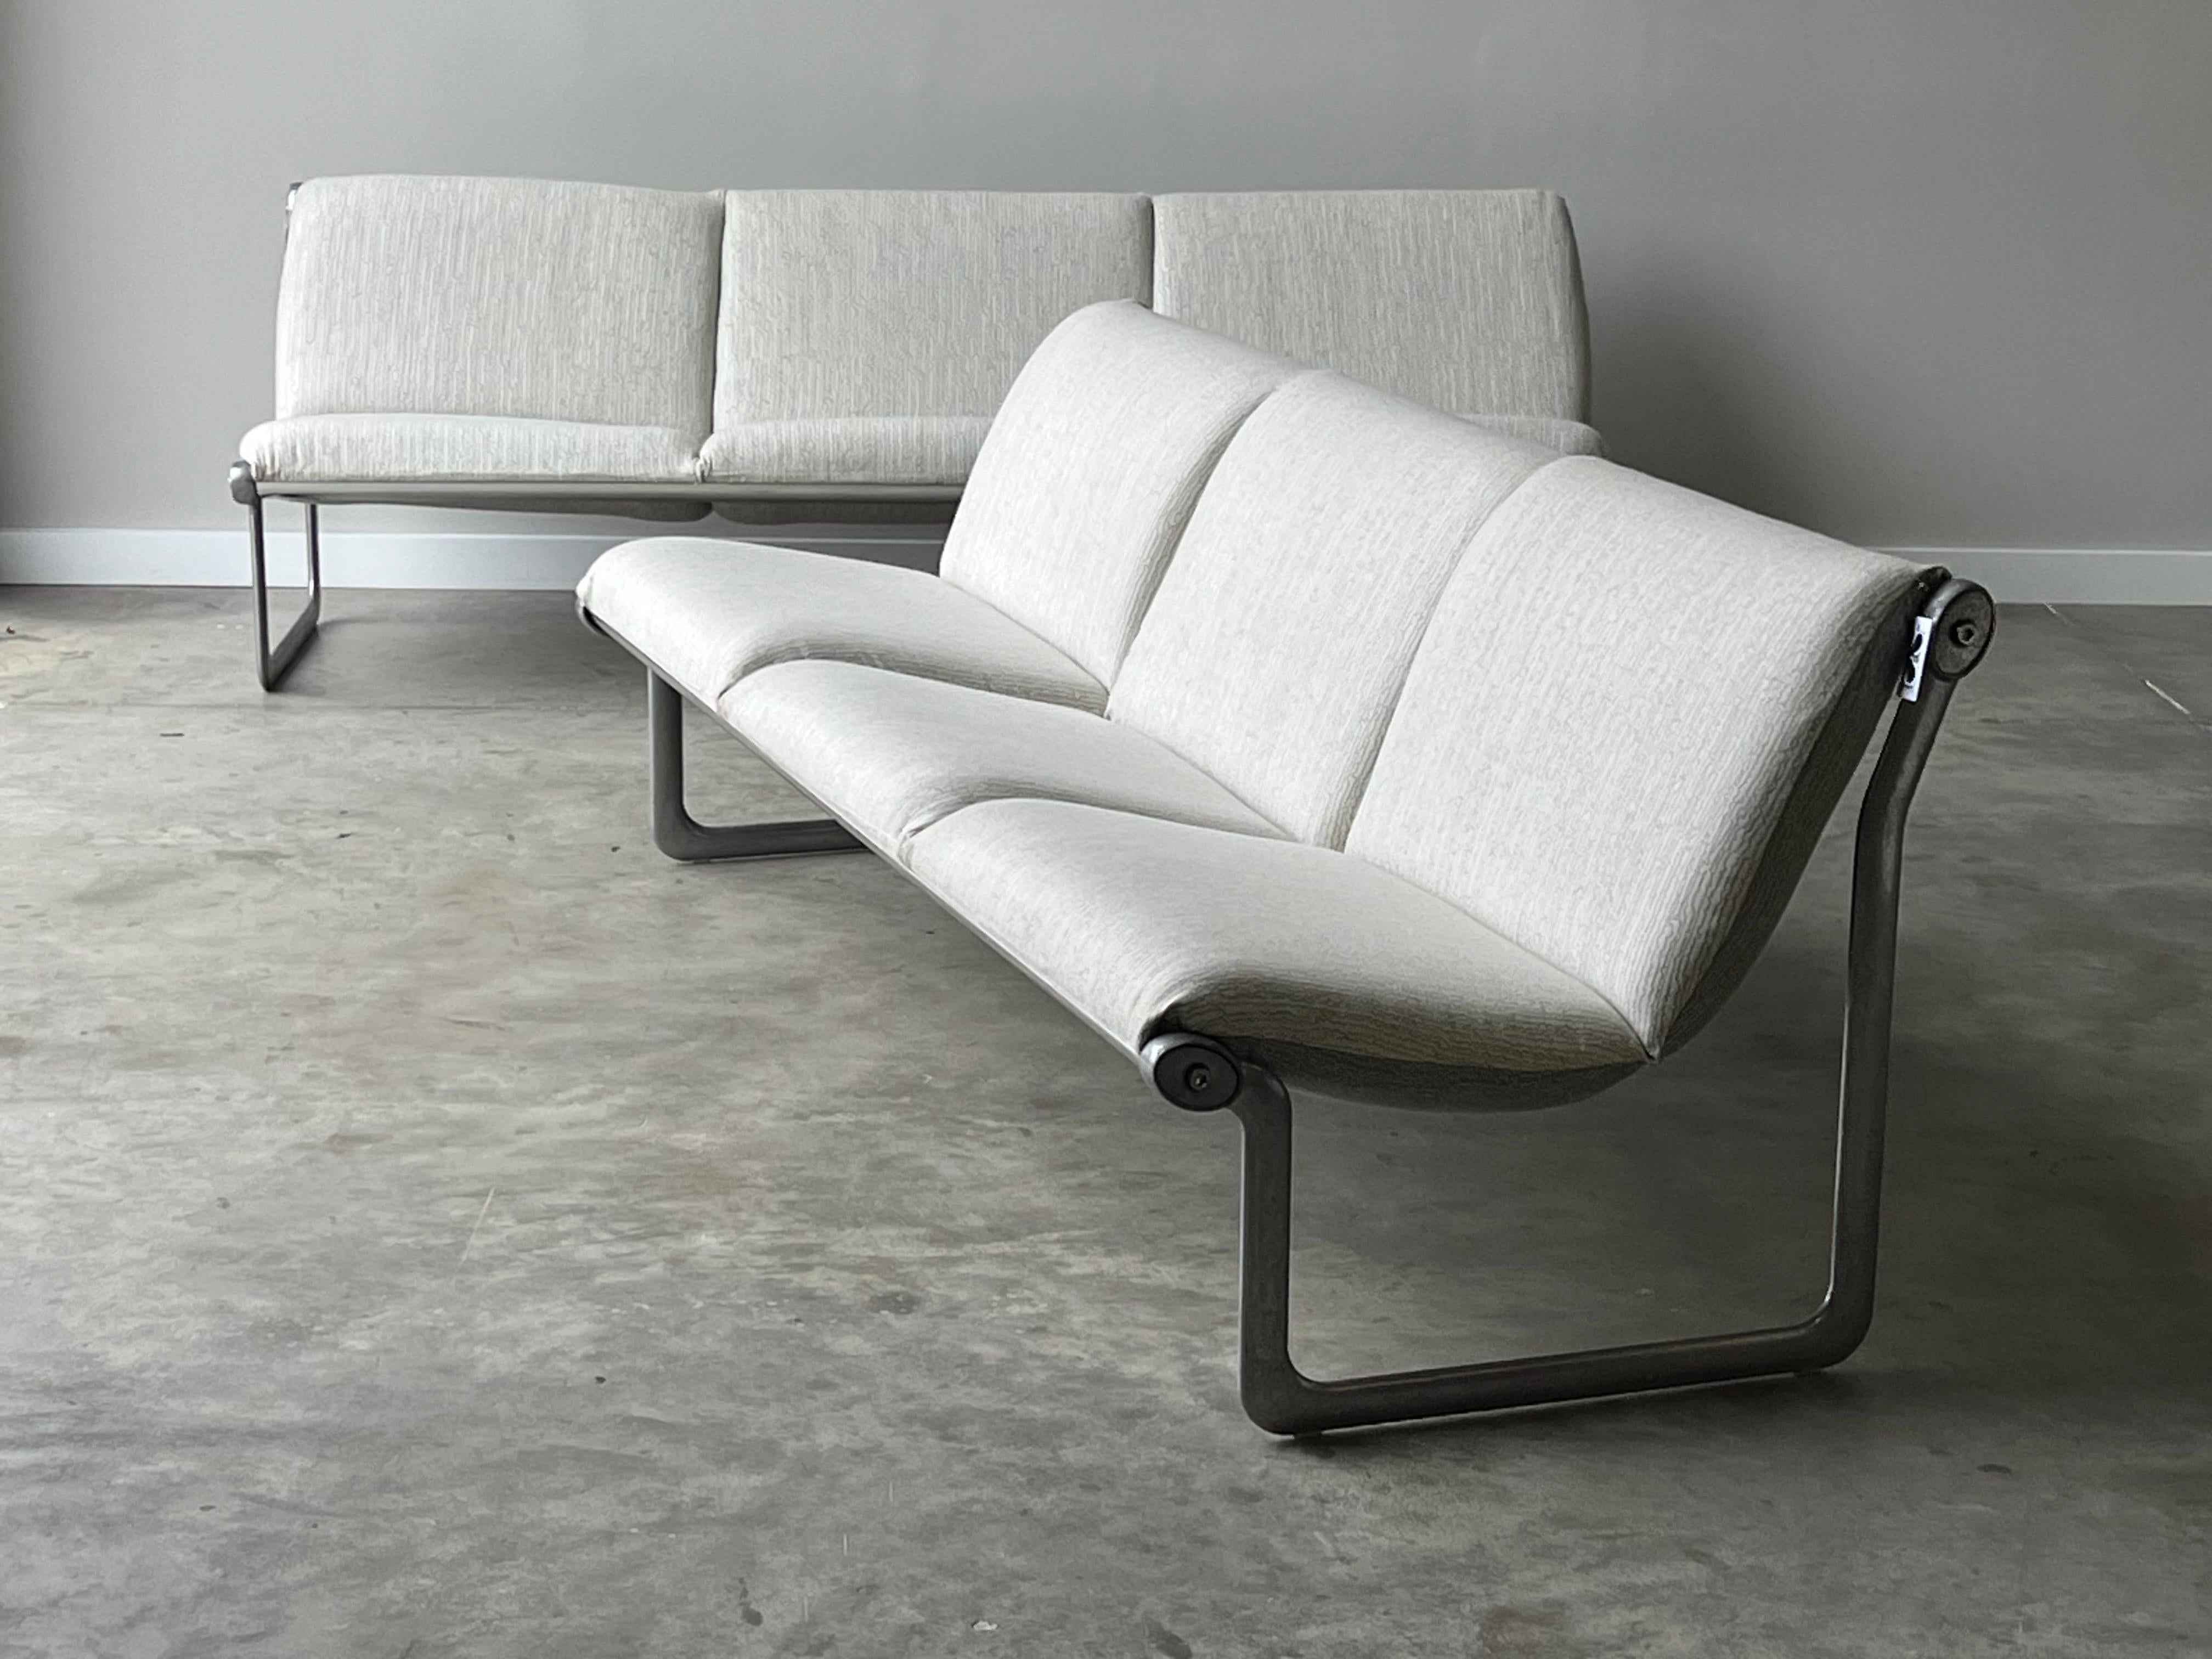 Vintage “Sling” Sofas by Bruce Hannah and Andrew Morrison for Knoll  1